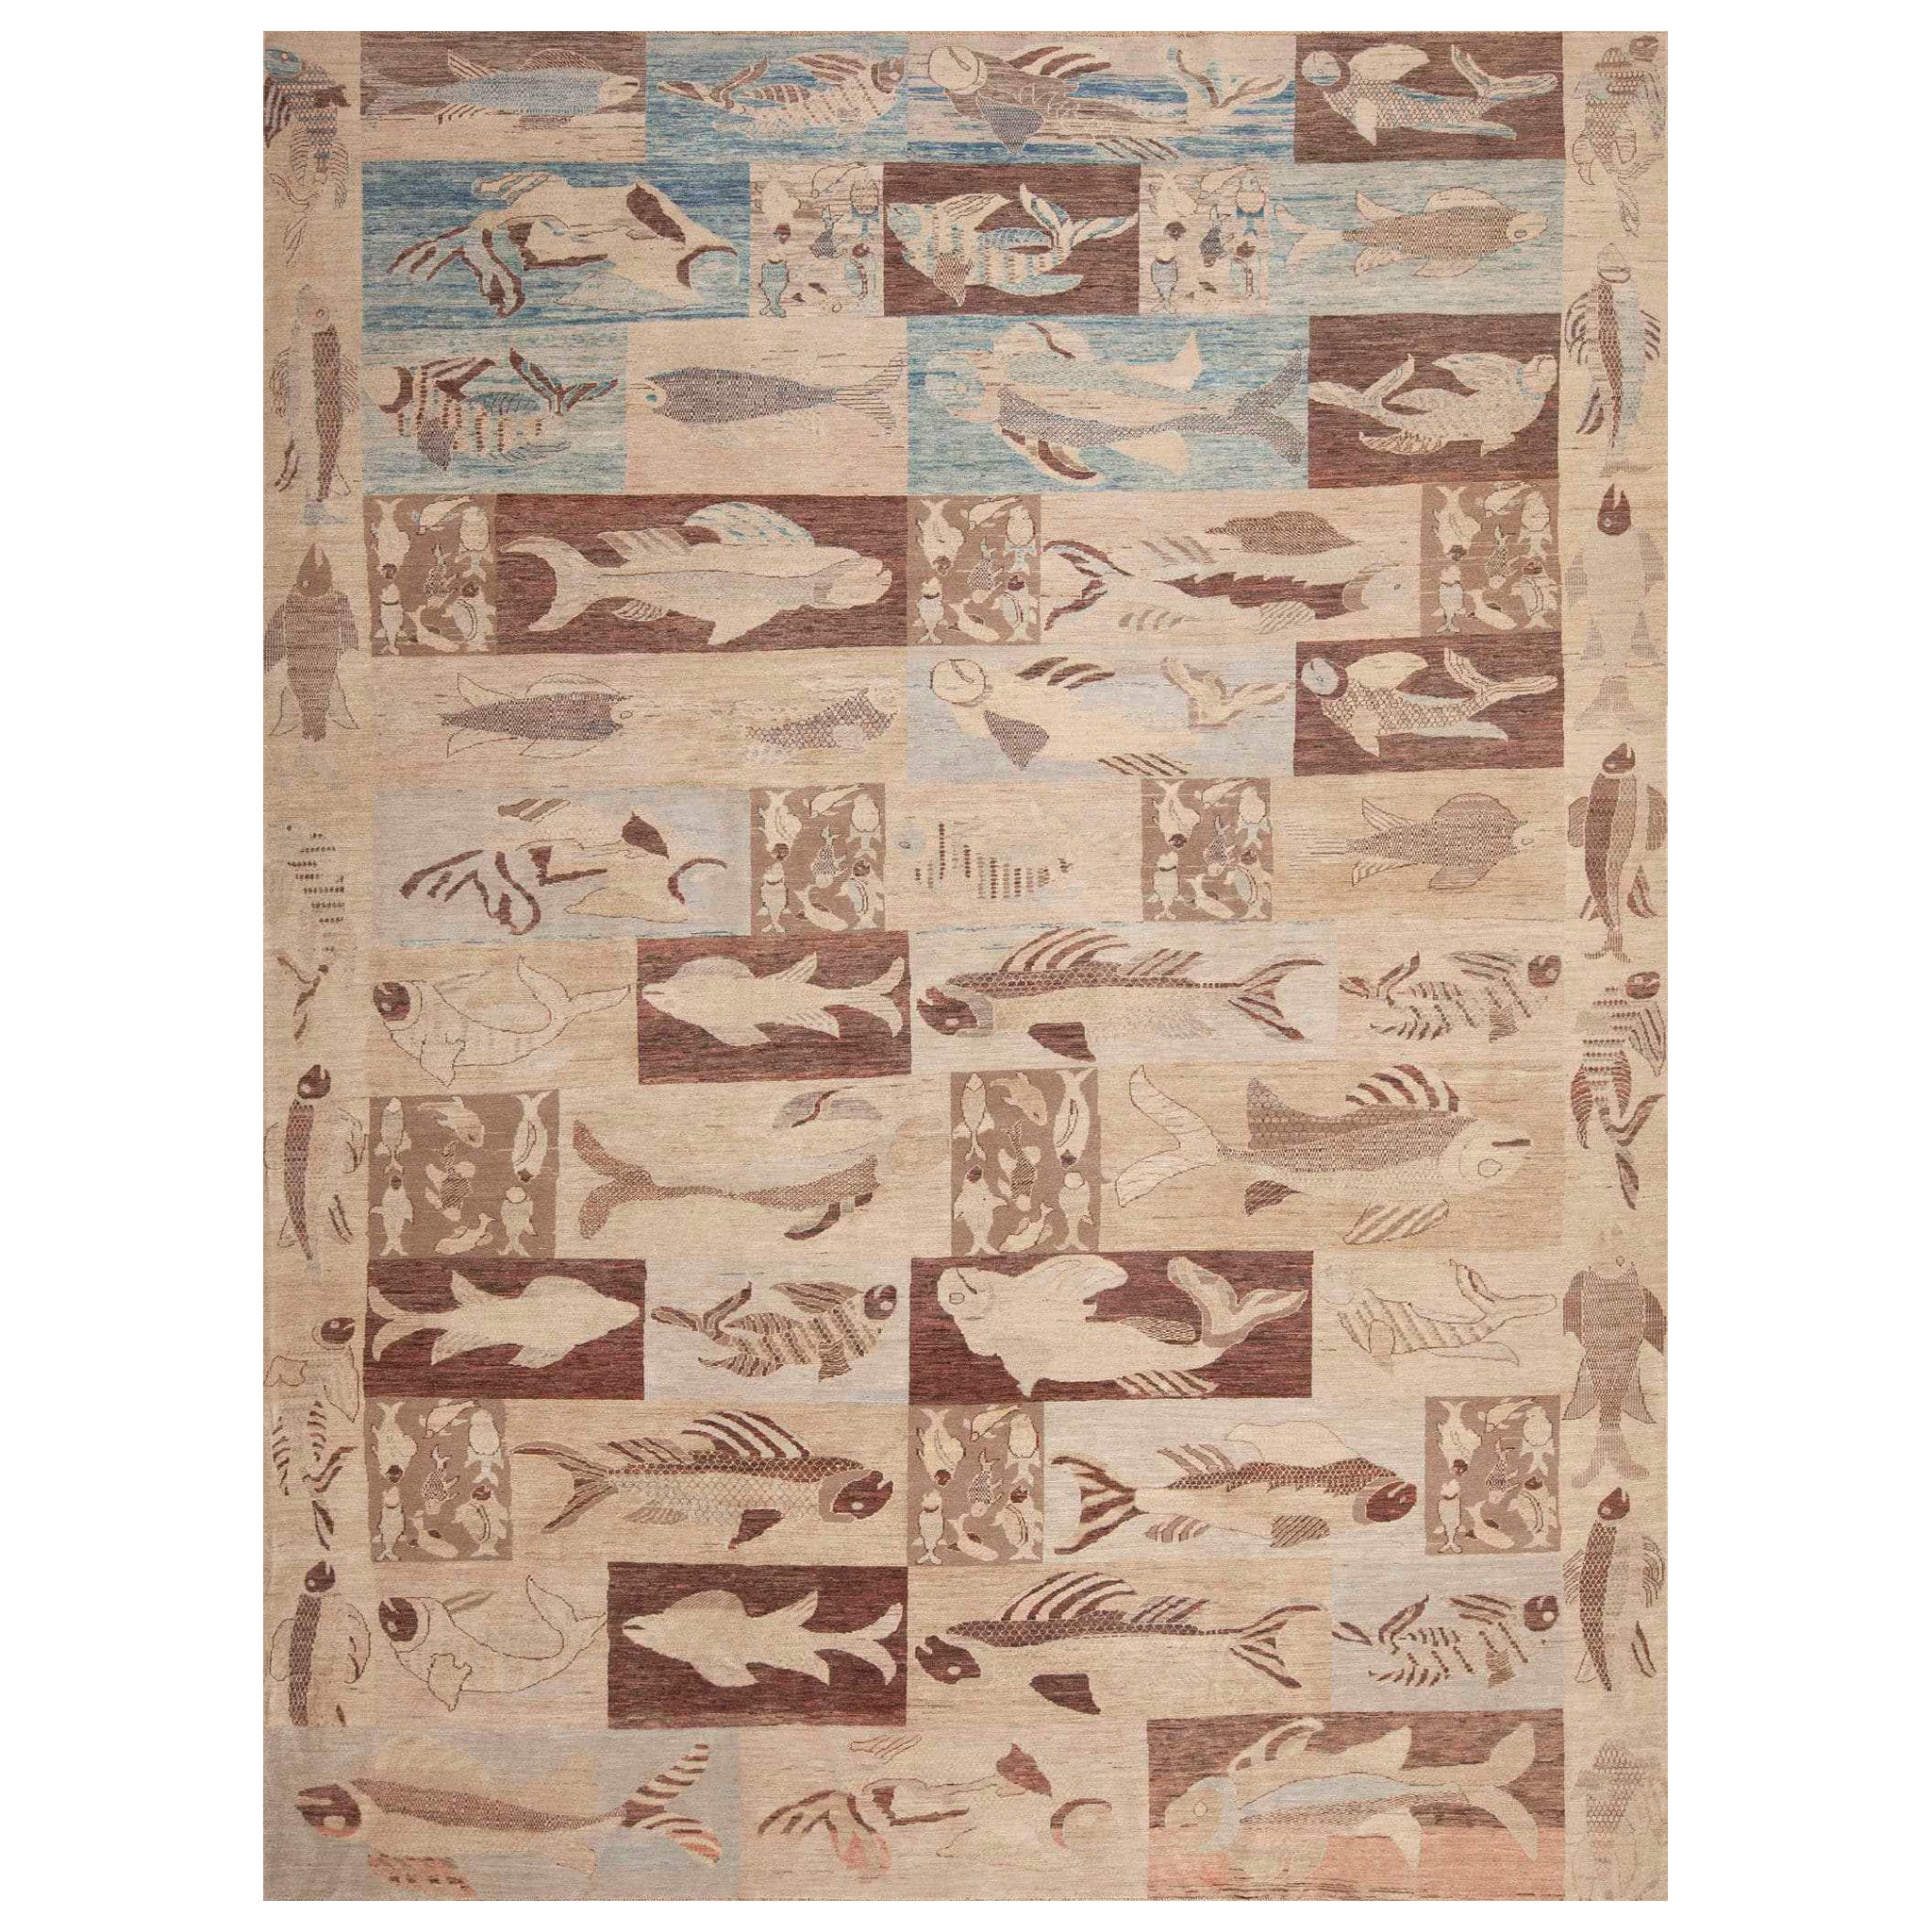 Nazmiyal Collection Artistic Aquatic Fish Design Modern Area Rug 9'9" x 13'2" For Sale